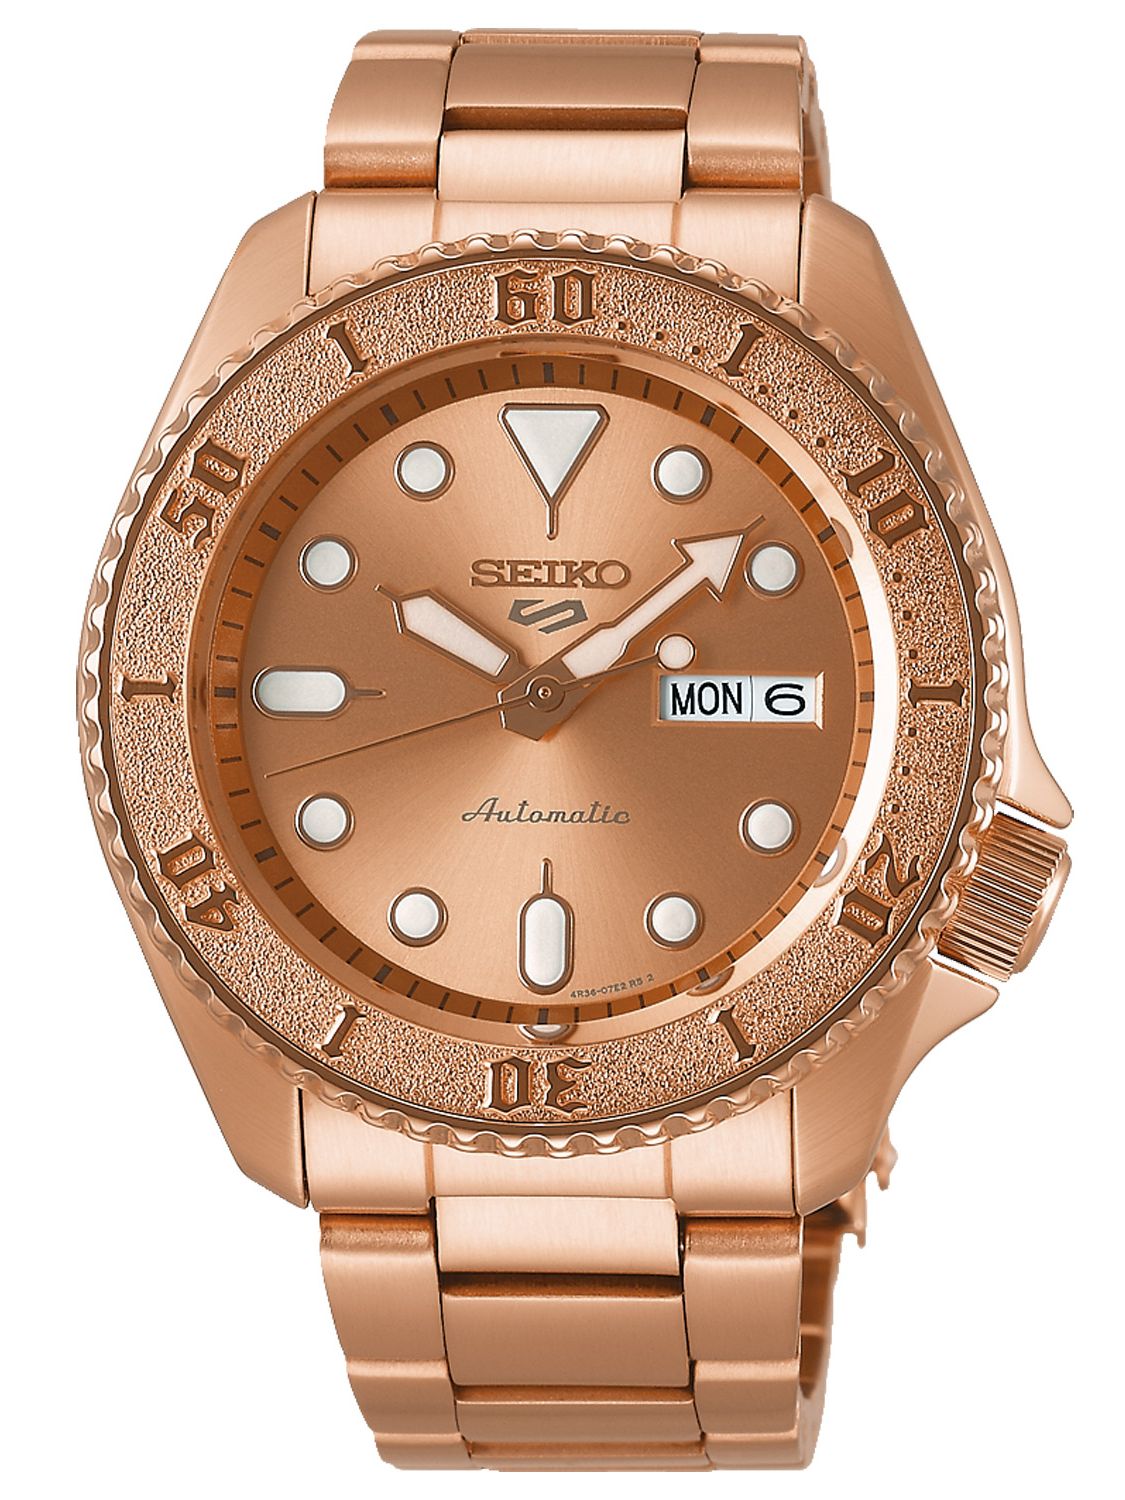 Seiko 5 Sports SRPE72K1 Automatic Men's Watch Rose Gold Plated Steel